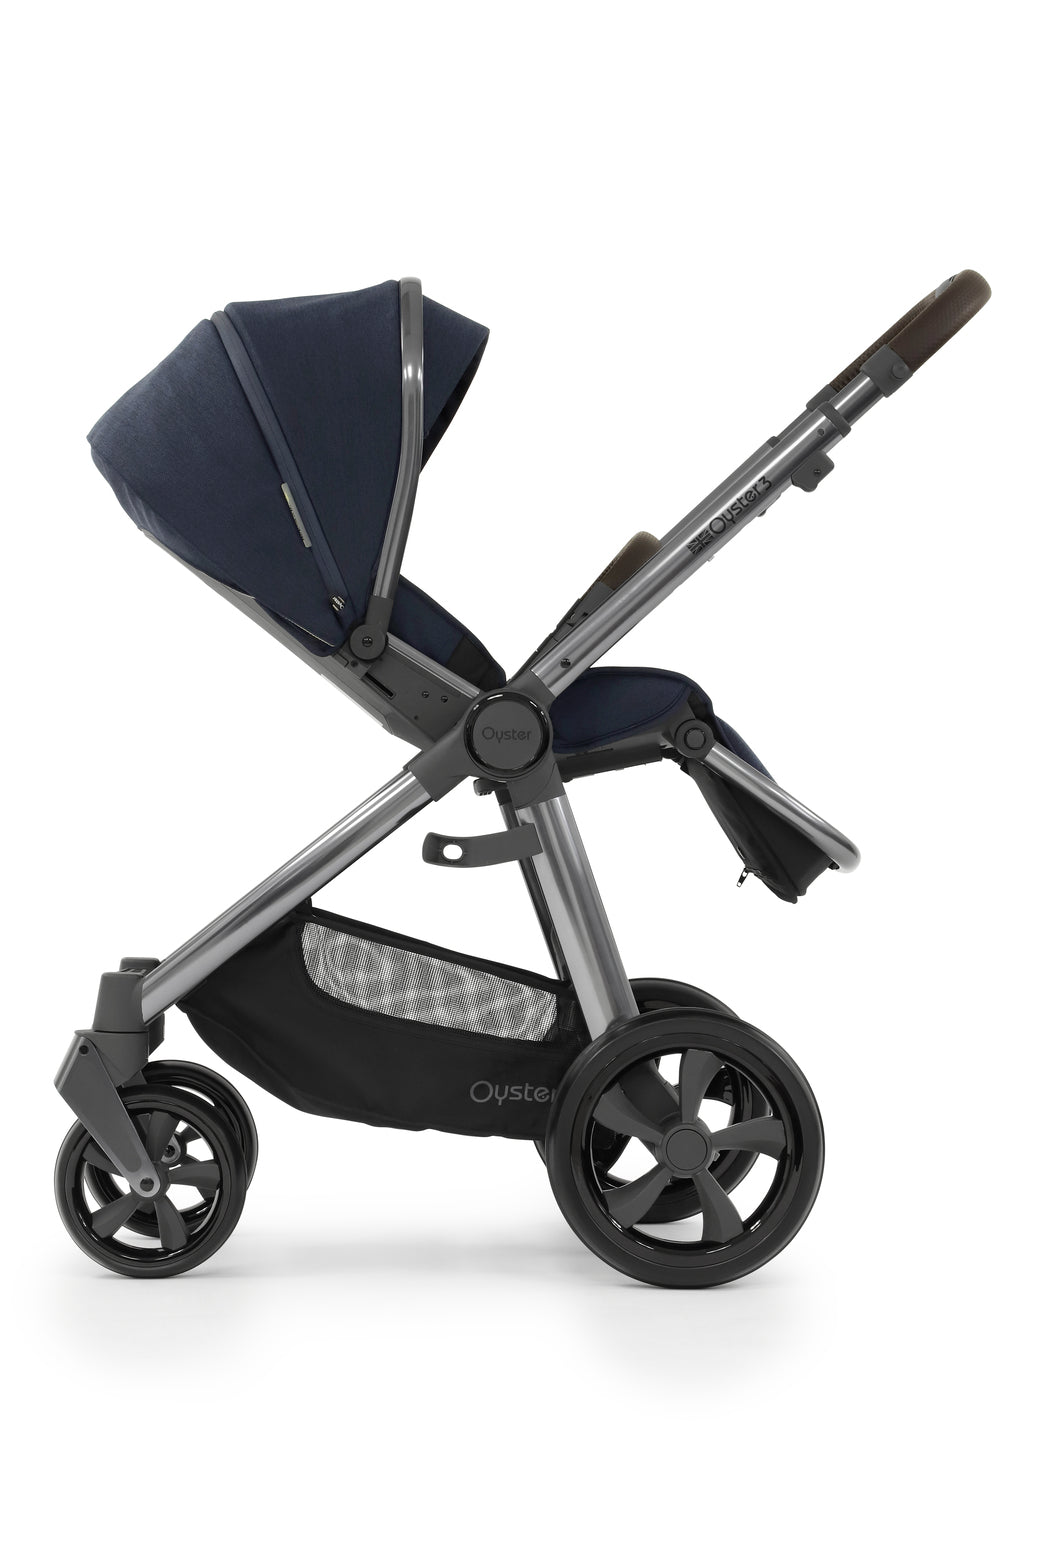 Babystyle Oyster 3 Luxury 7 Piece Travel System Bundle With Pebble 360 - Twilight -  | For Your Little One